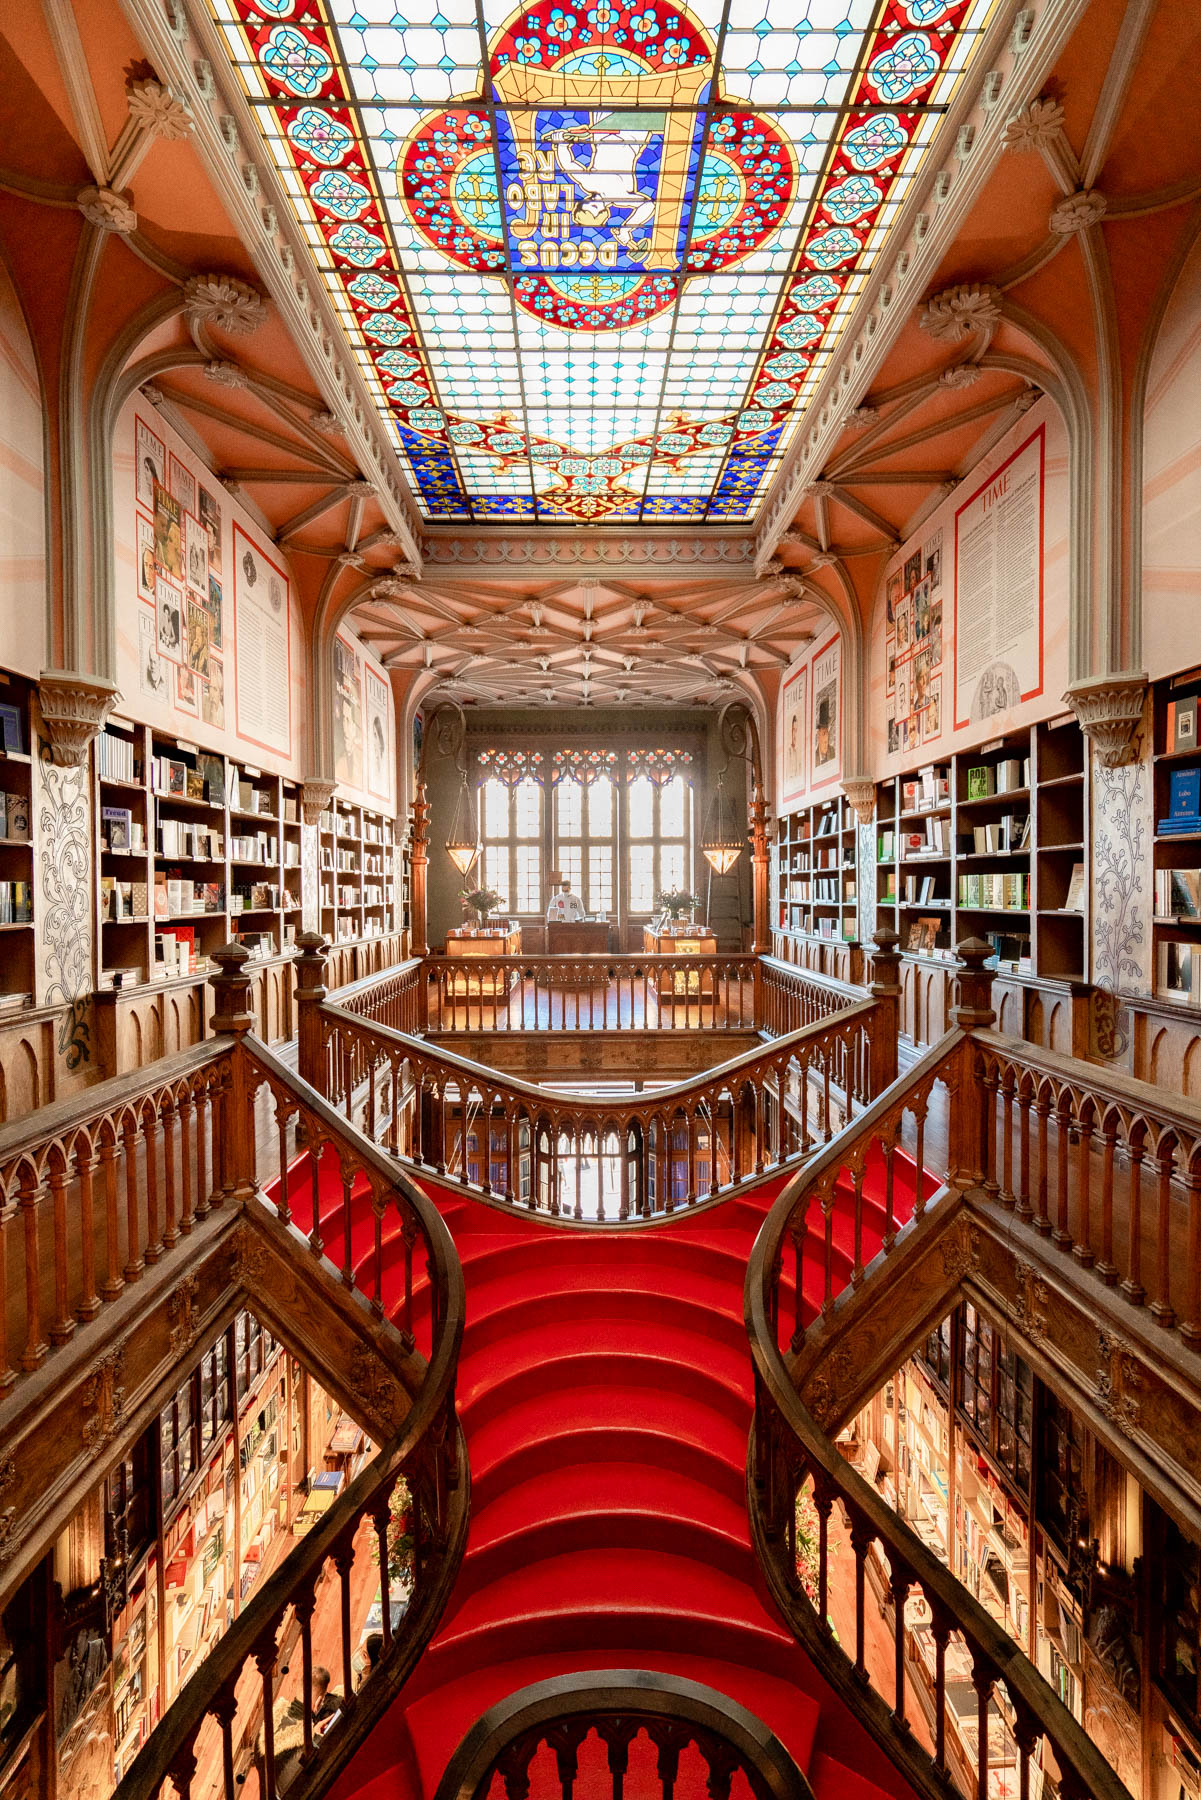 Best things to do Porto
Inside Livraria Lello
Red staircase bookstore Portugal